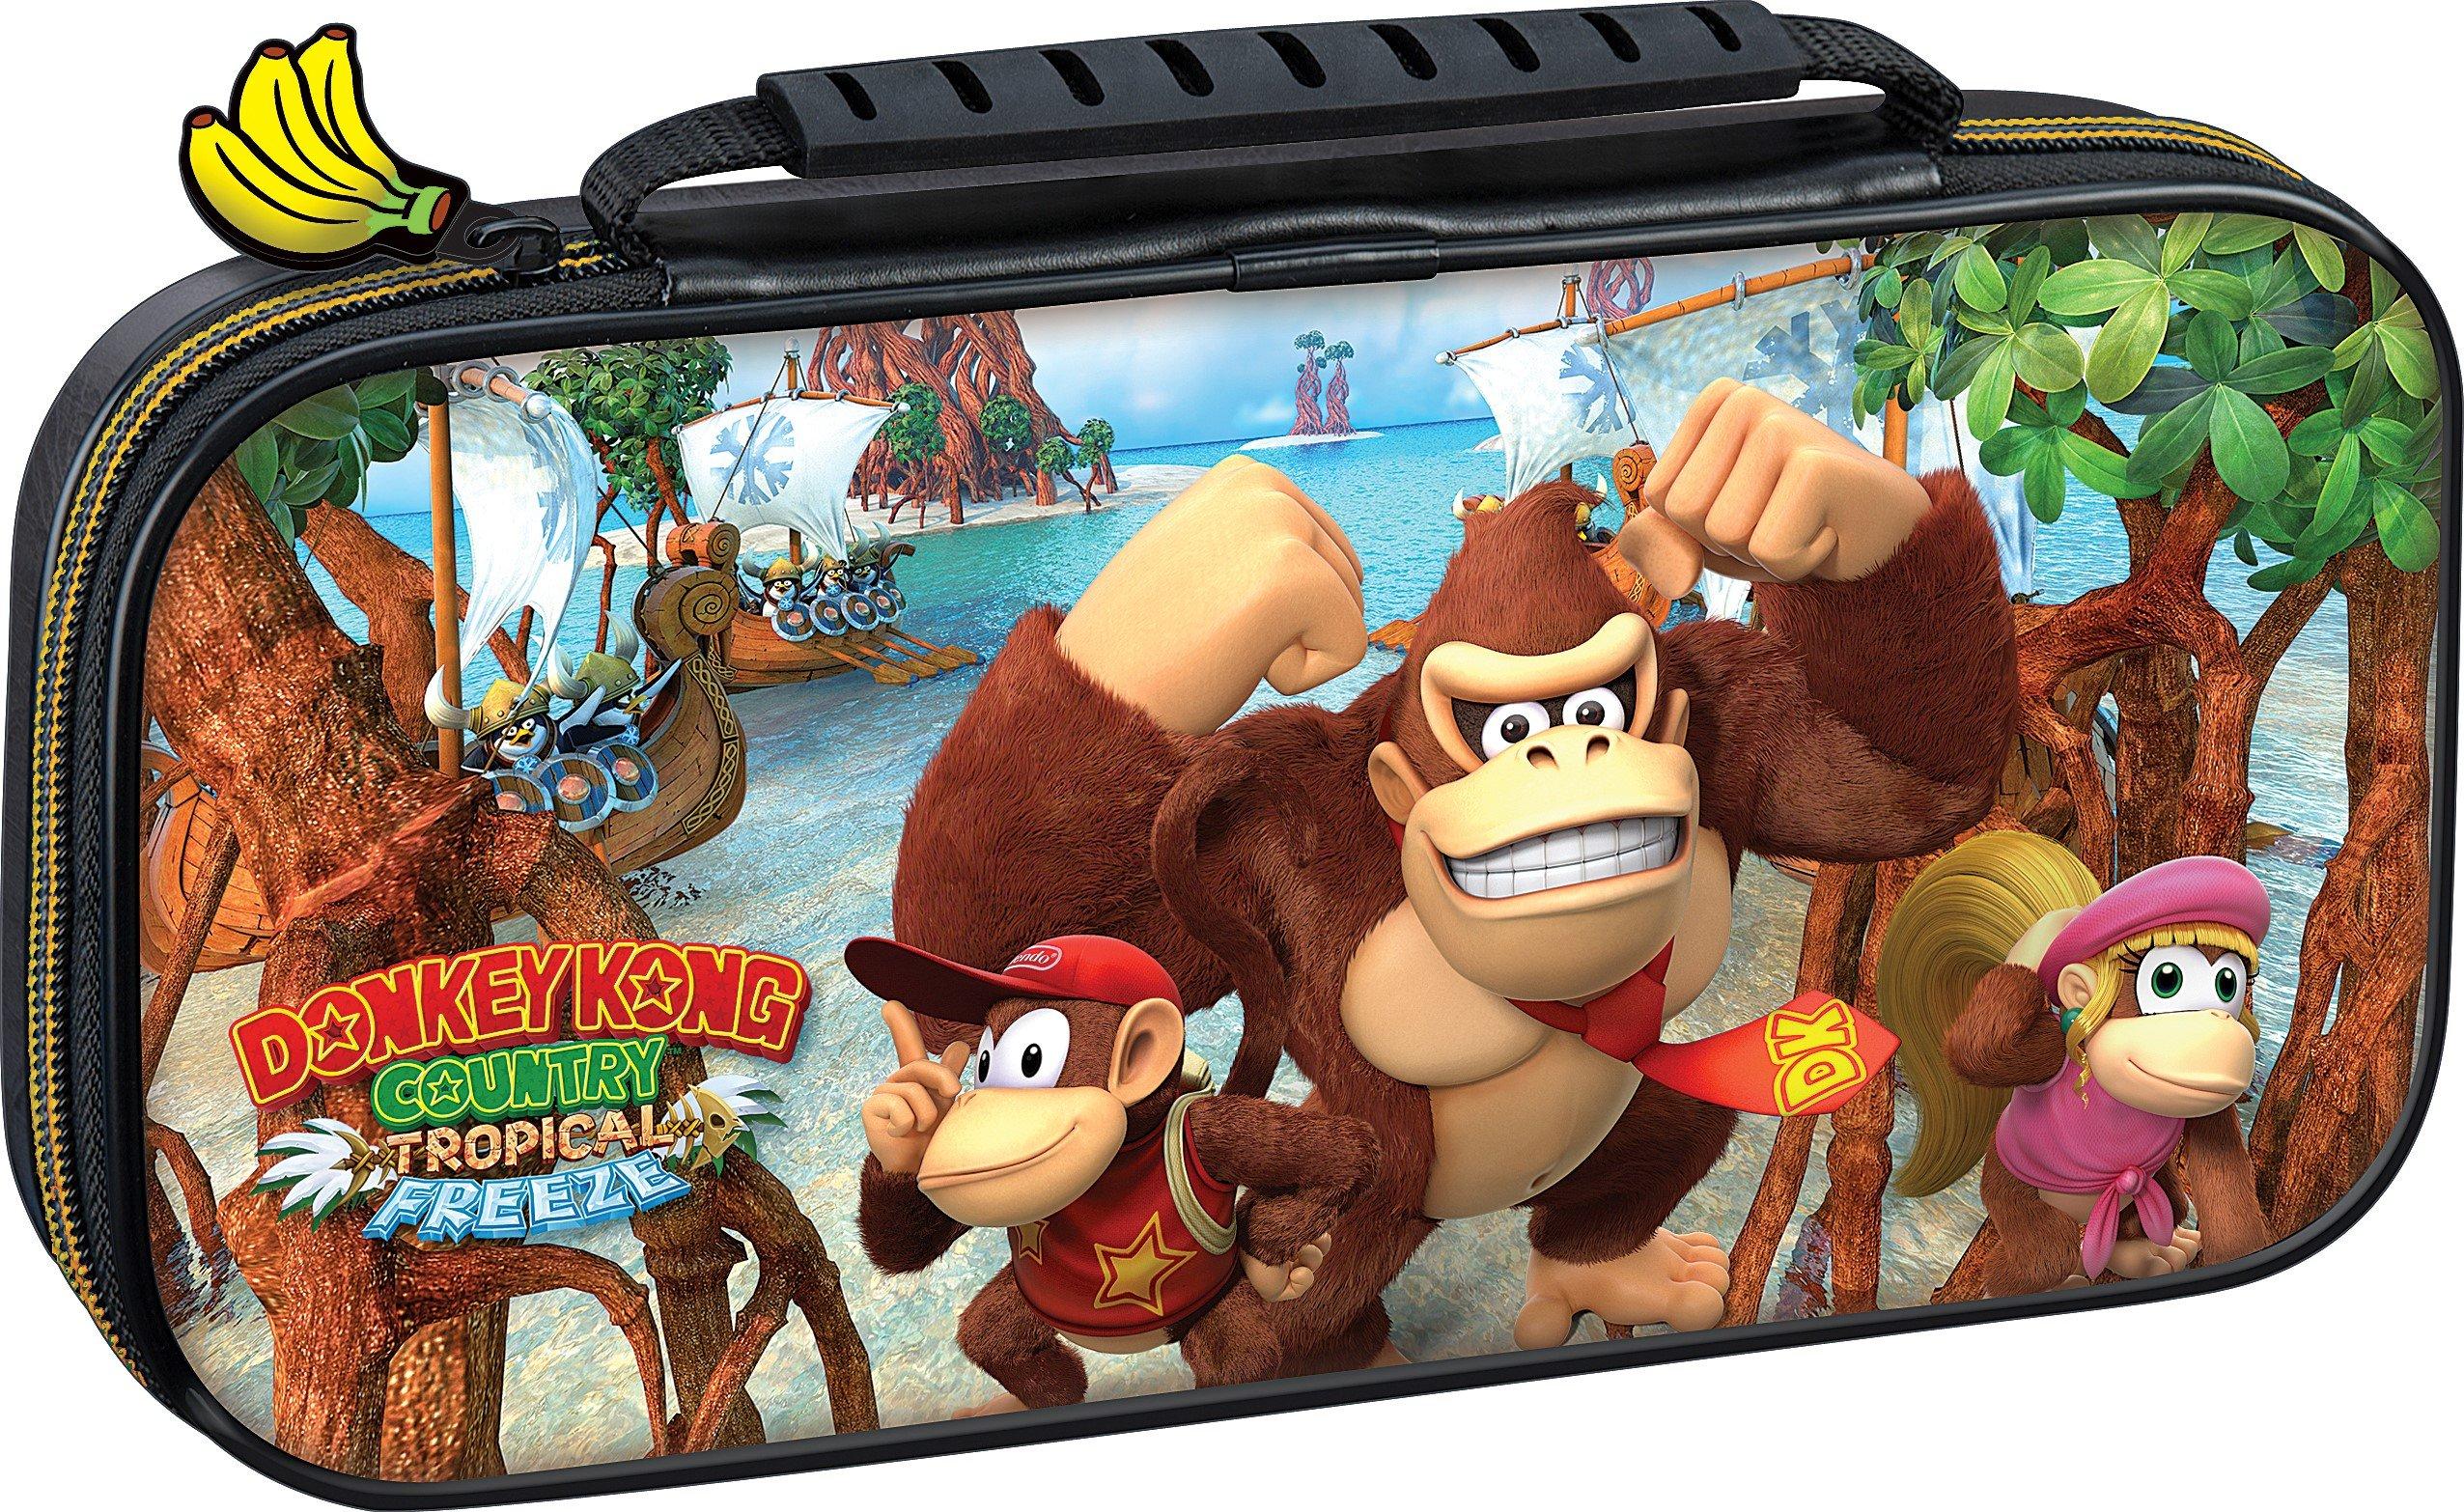 donkey kong for the switch